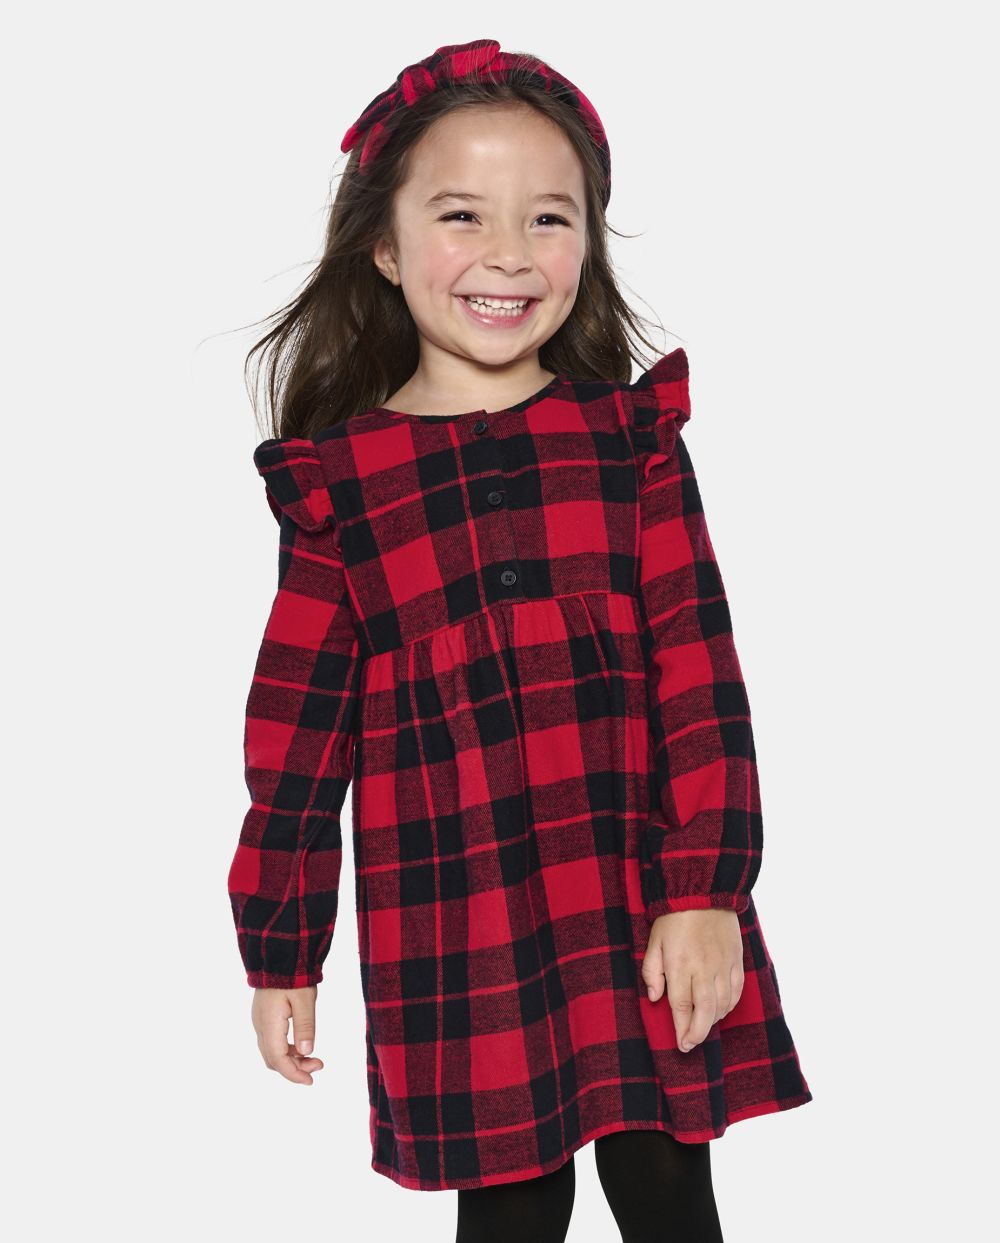 Toddler Baby Button Front Above the Knee Plaid Print Crew Neck Flutter Long Sleeves Shirt Dress